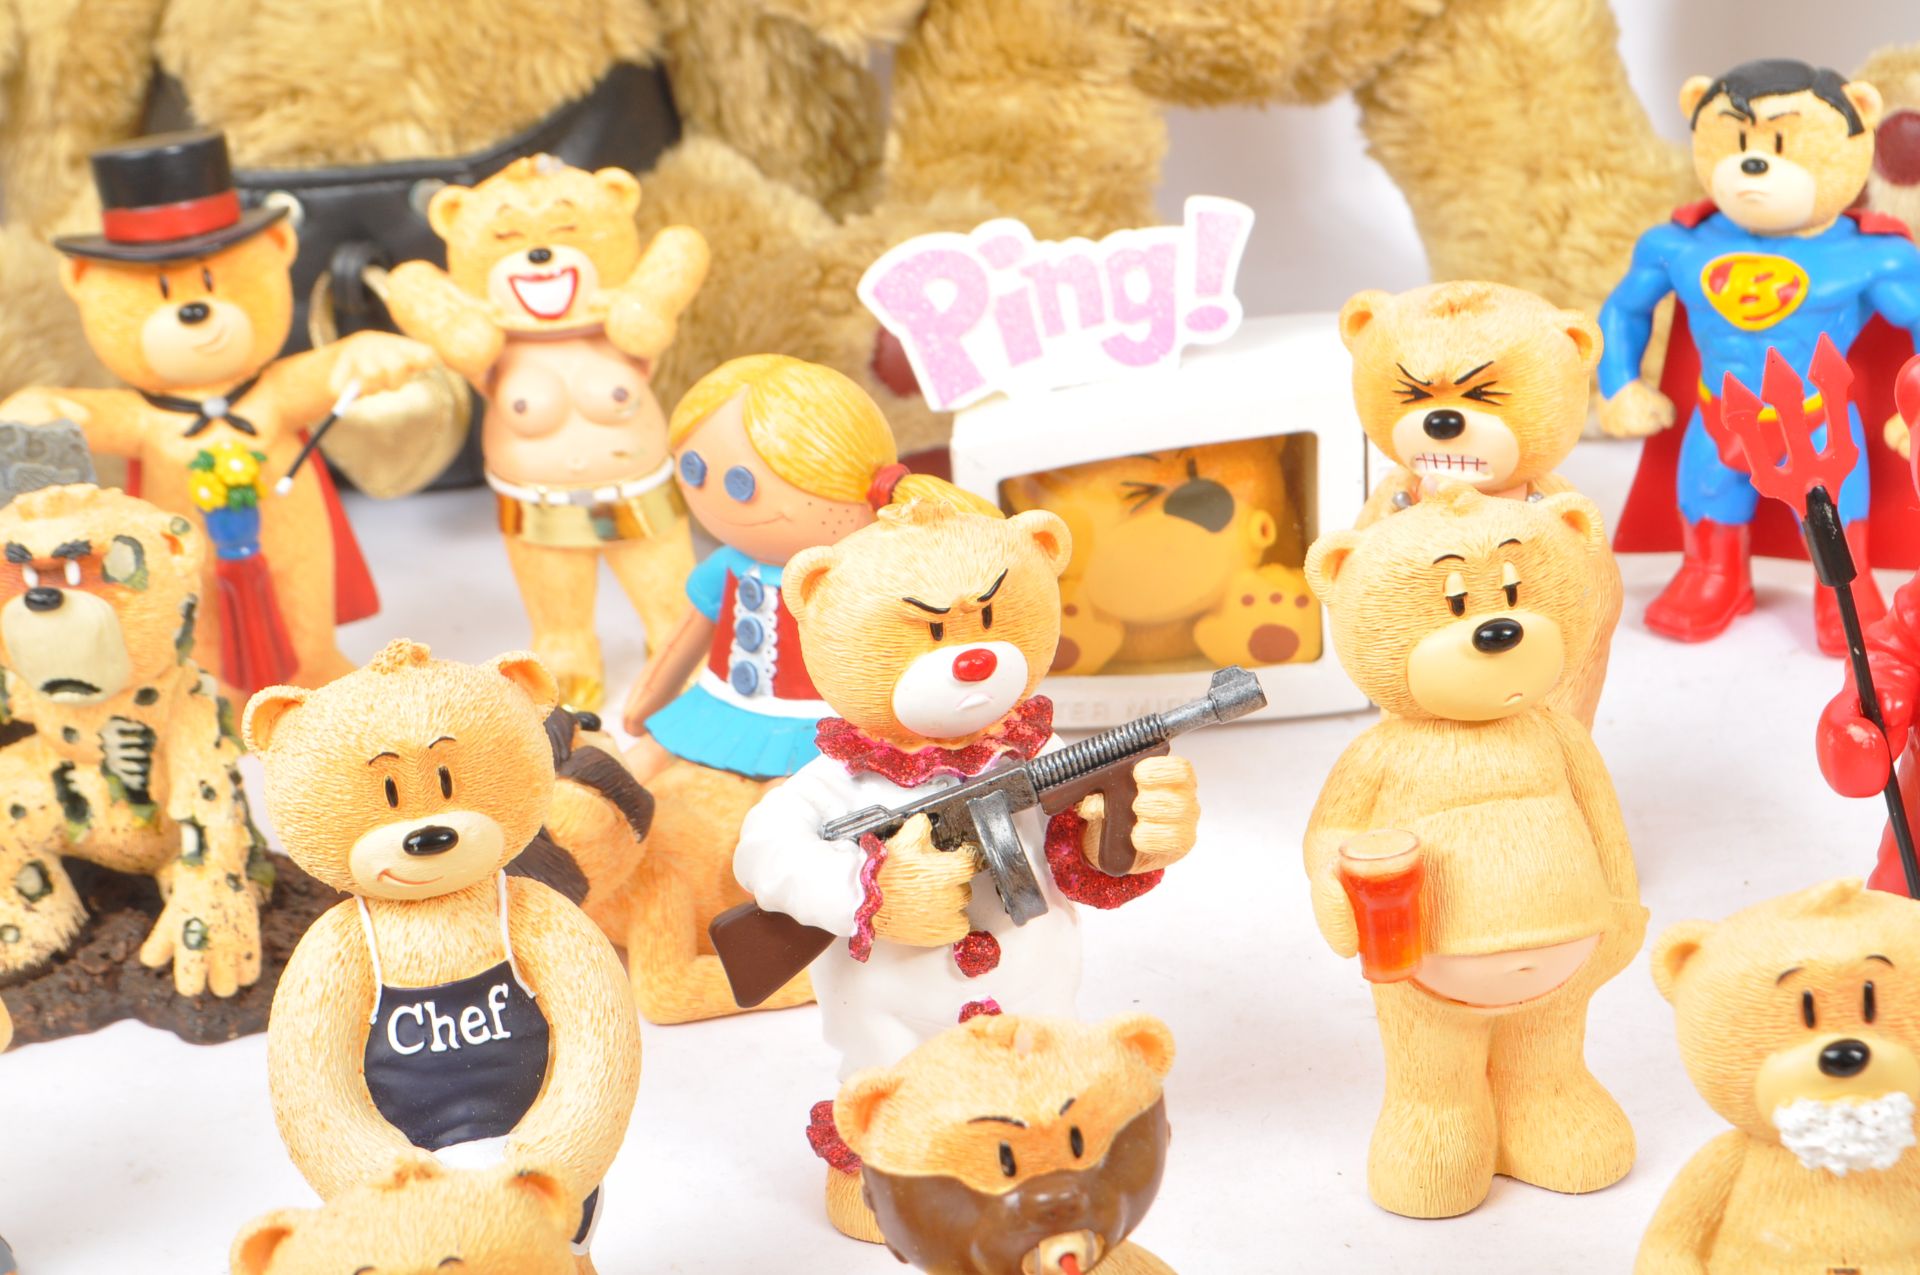 LARGE COLLECTION OF BAD TASTE BEARS FIGURINES - Image 5 of 12